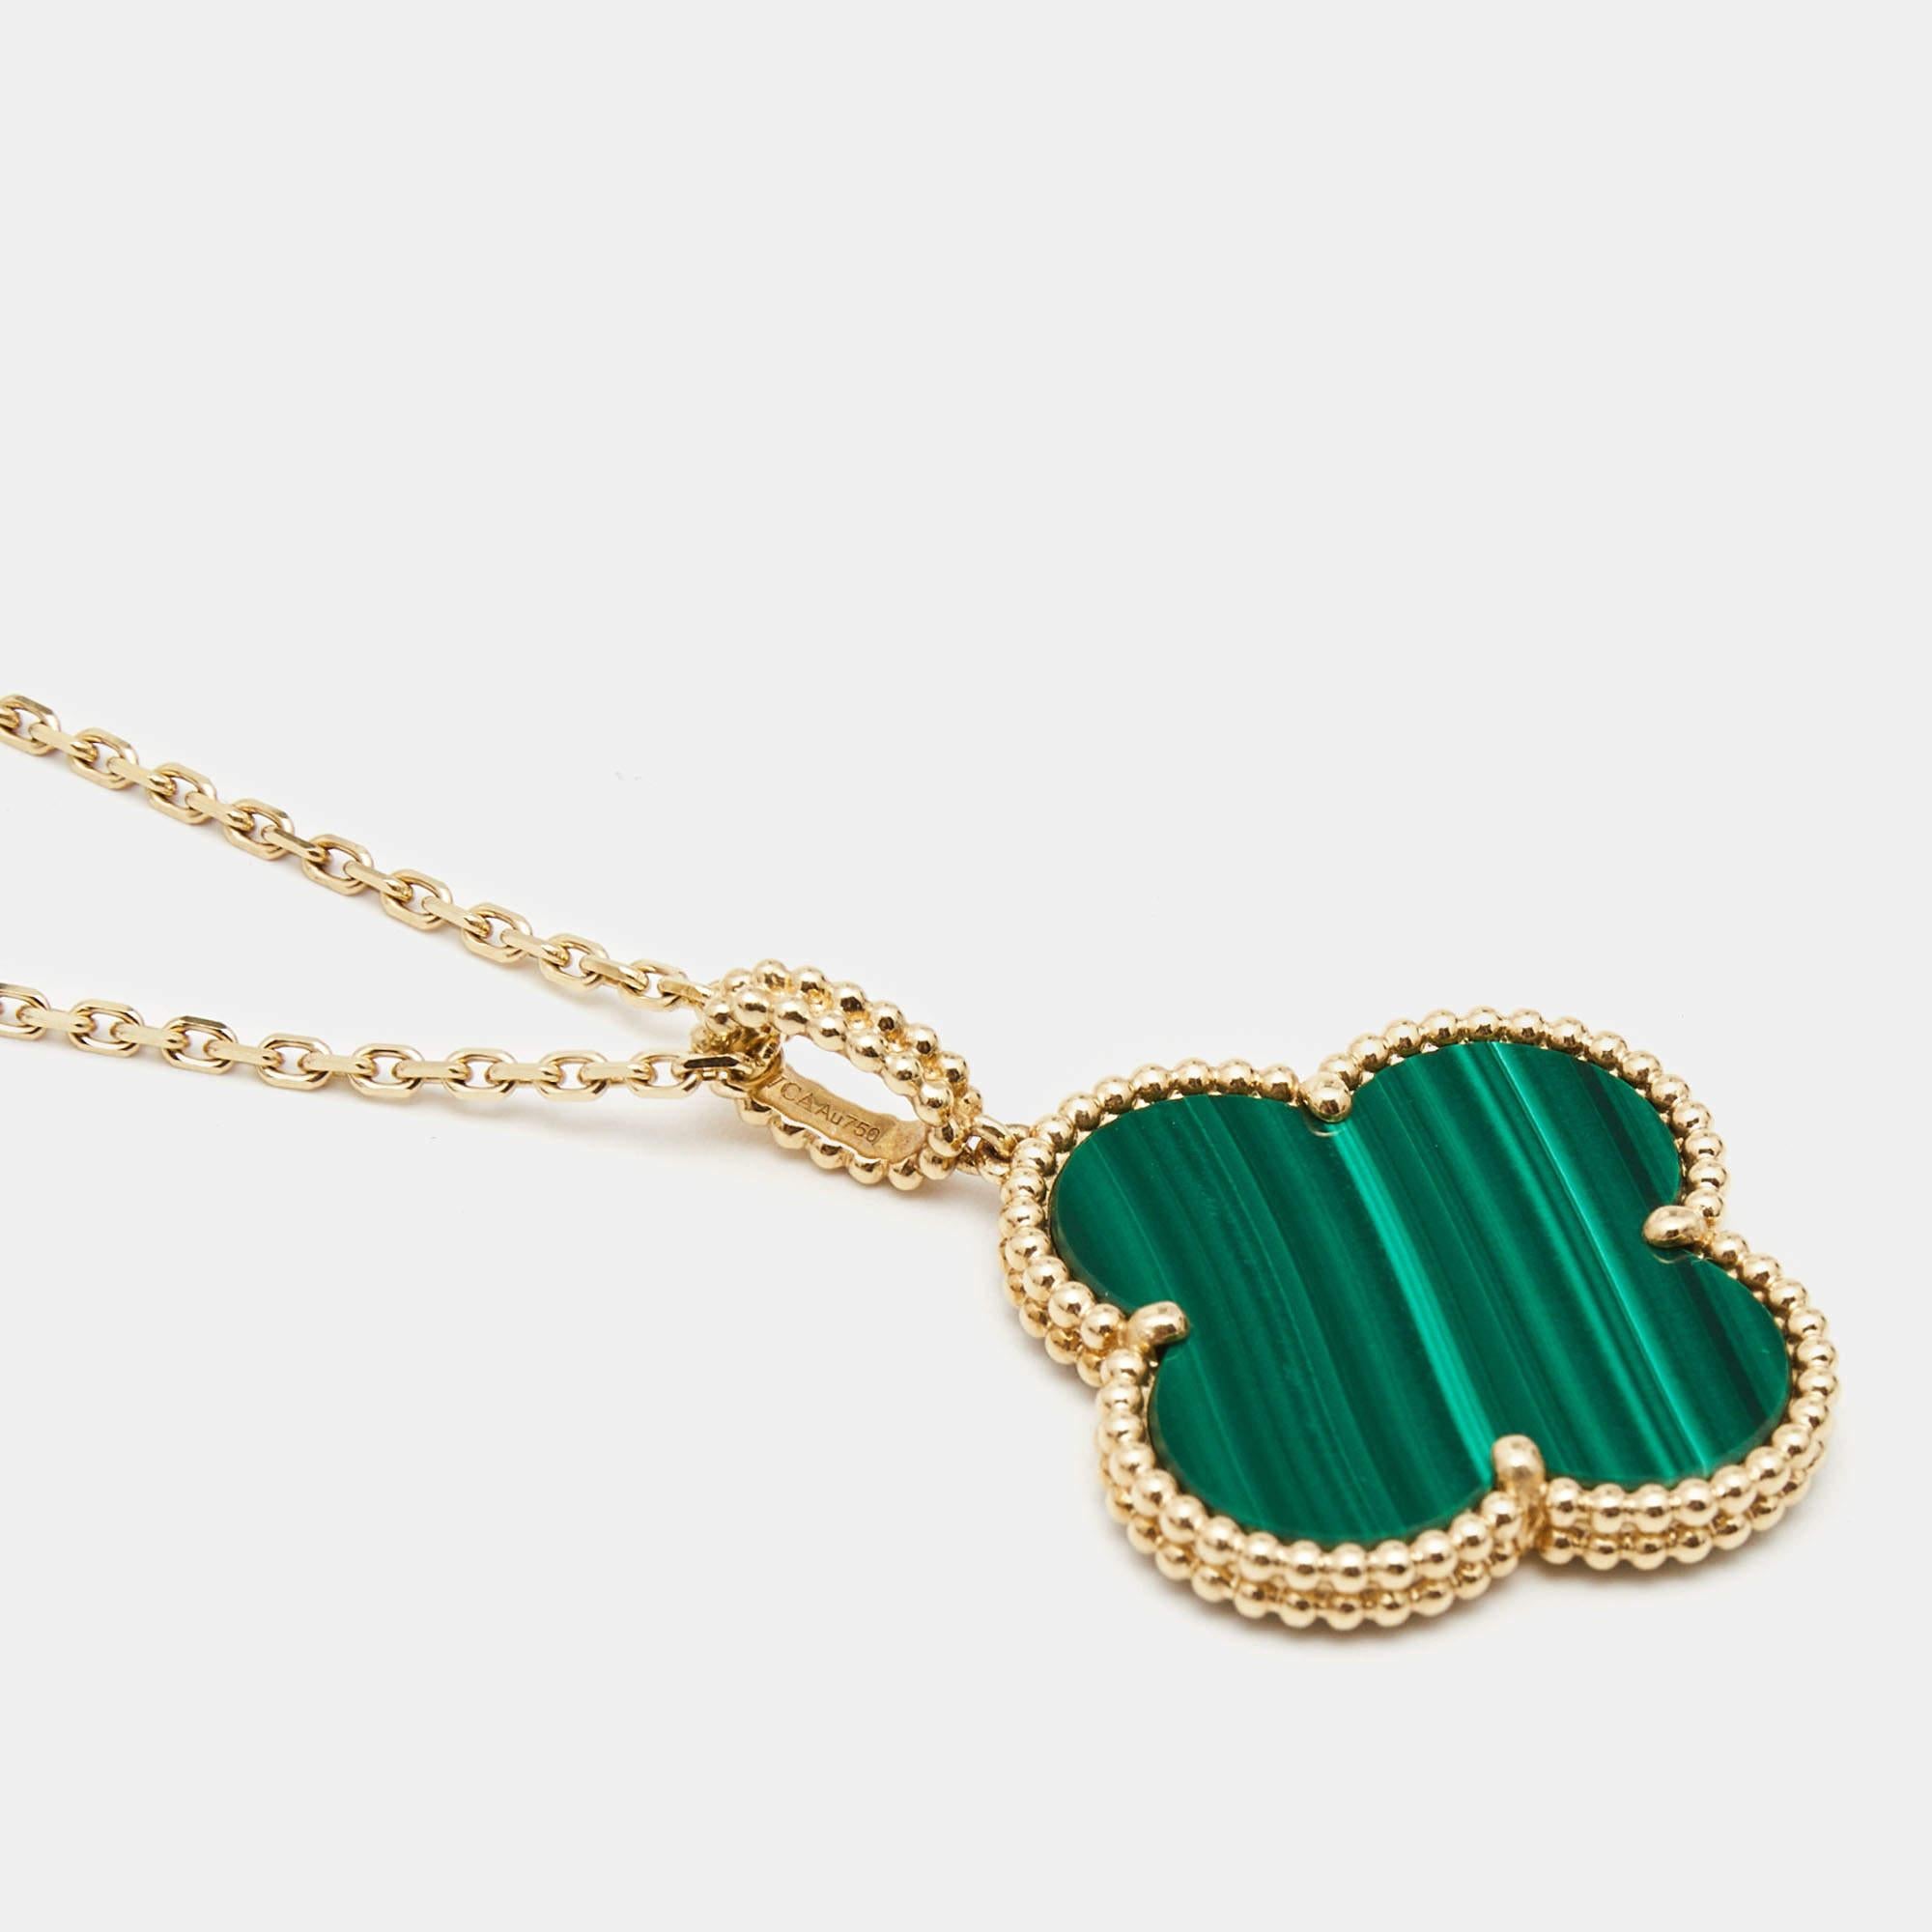 The Van Cleef & Arpels Magic Alhambra necklace exudes timeless elegance. Crafted from lustrous 18k yellow gold, it features the iconic Alhambra motif adorned with stunning malachite, a deep green semi-precious gemstone. This exquisite piece